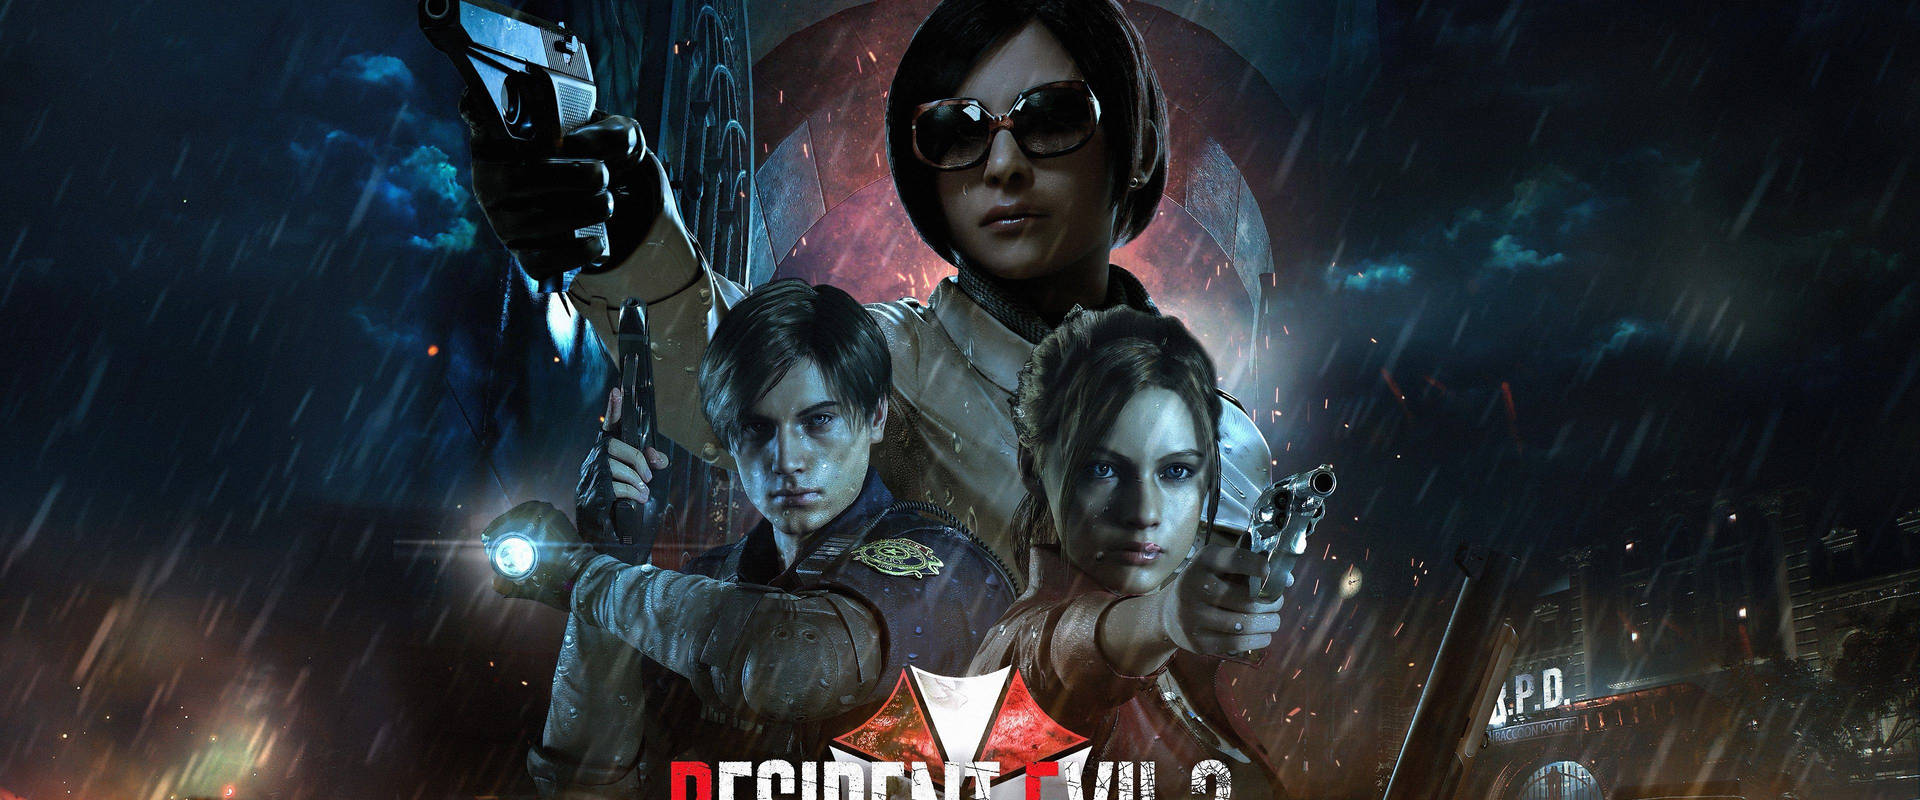 3840X1600 Resident Evil 2 Wallpaper and Background